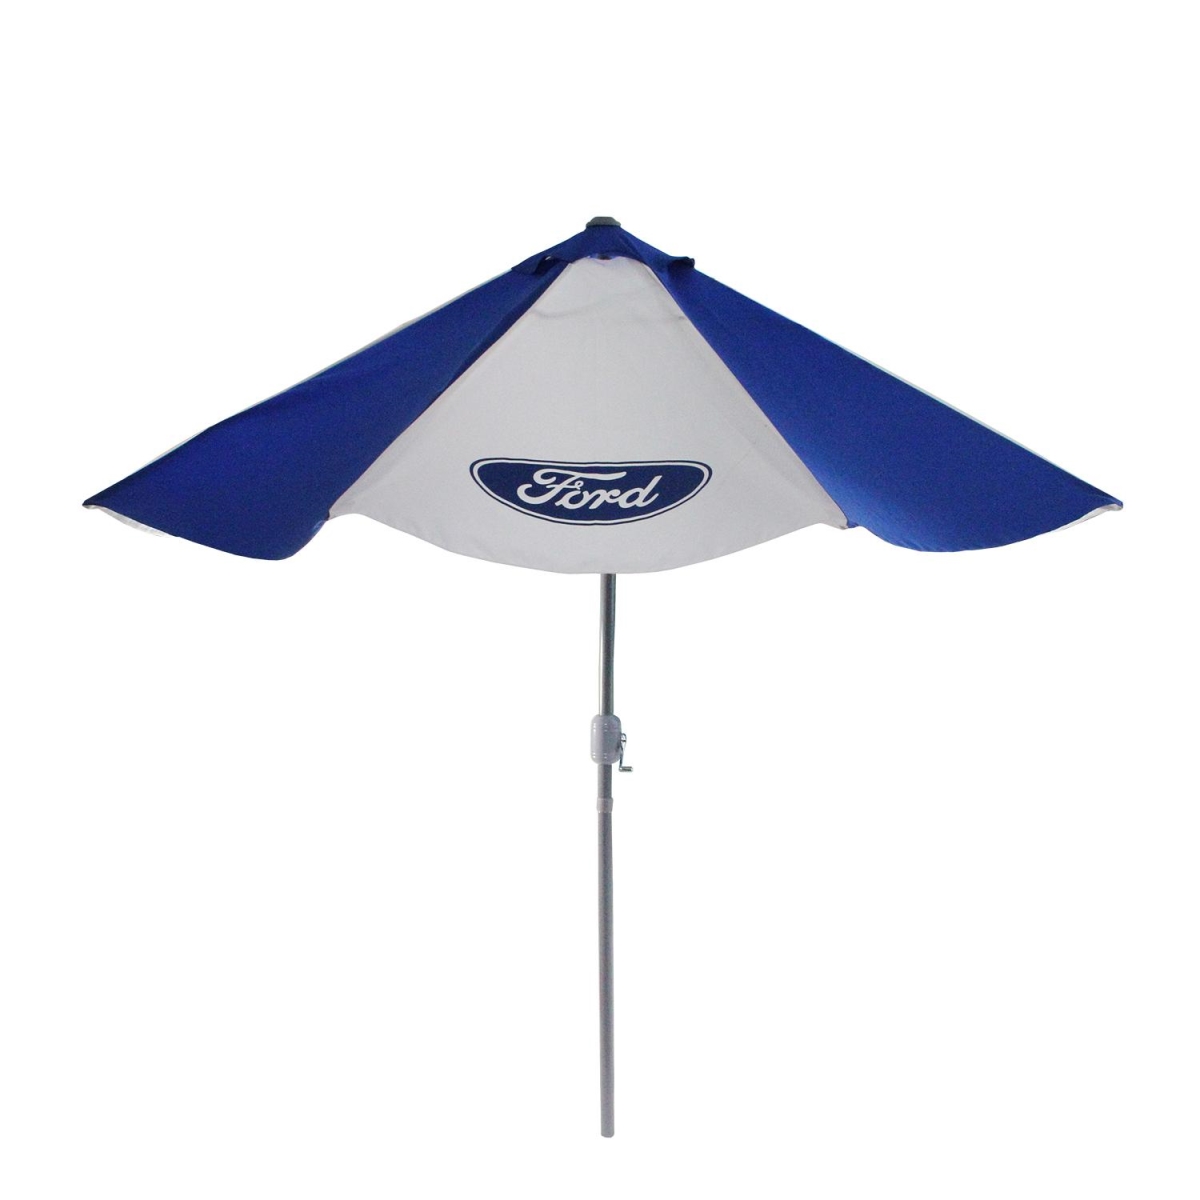 32637141 9 Ft. Blue & White Ford Outdoor Umbrella With Hand Crank & Tilt